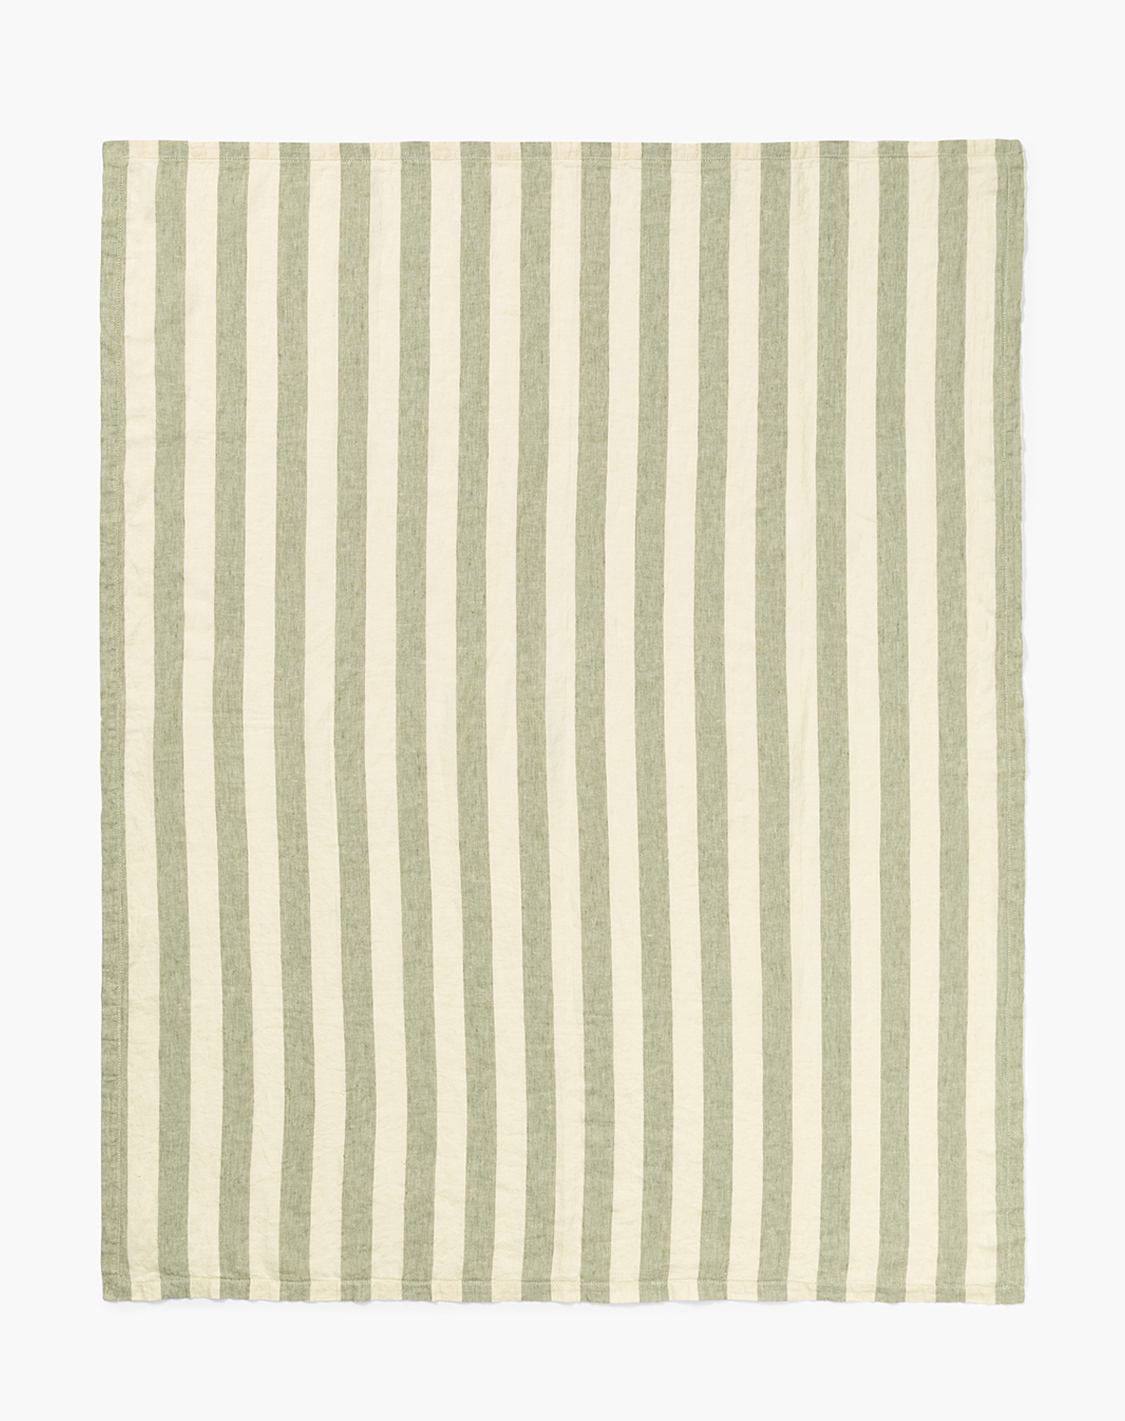 Linen Beach Towel Thin Stripe Green Bay And Off White